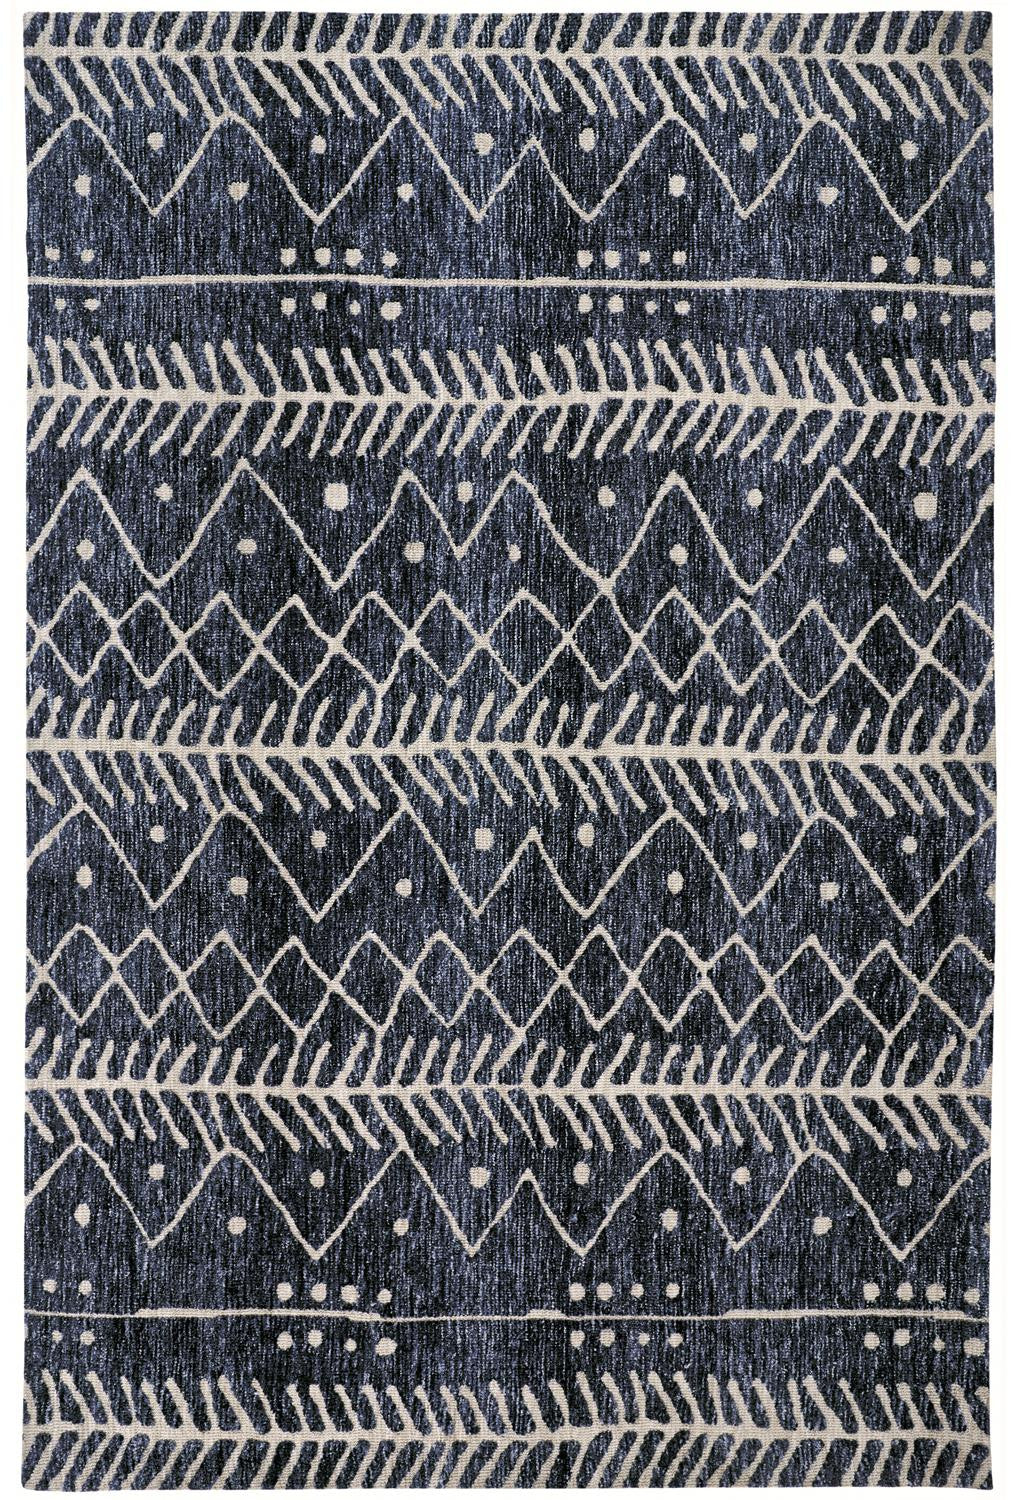 10' X 13' Blue And Ivory Striped Stain Resistant Area Rug